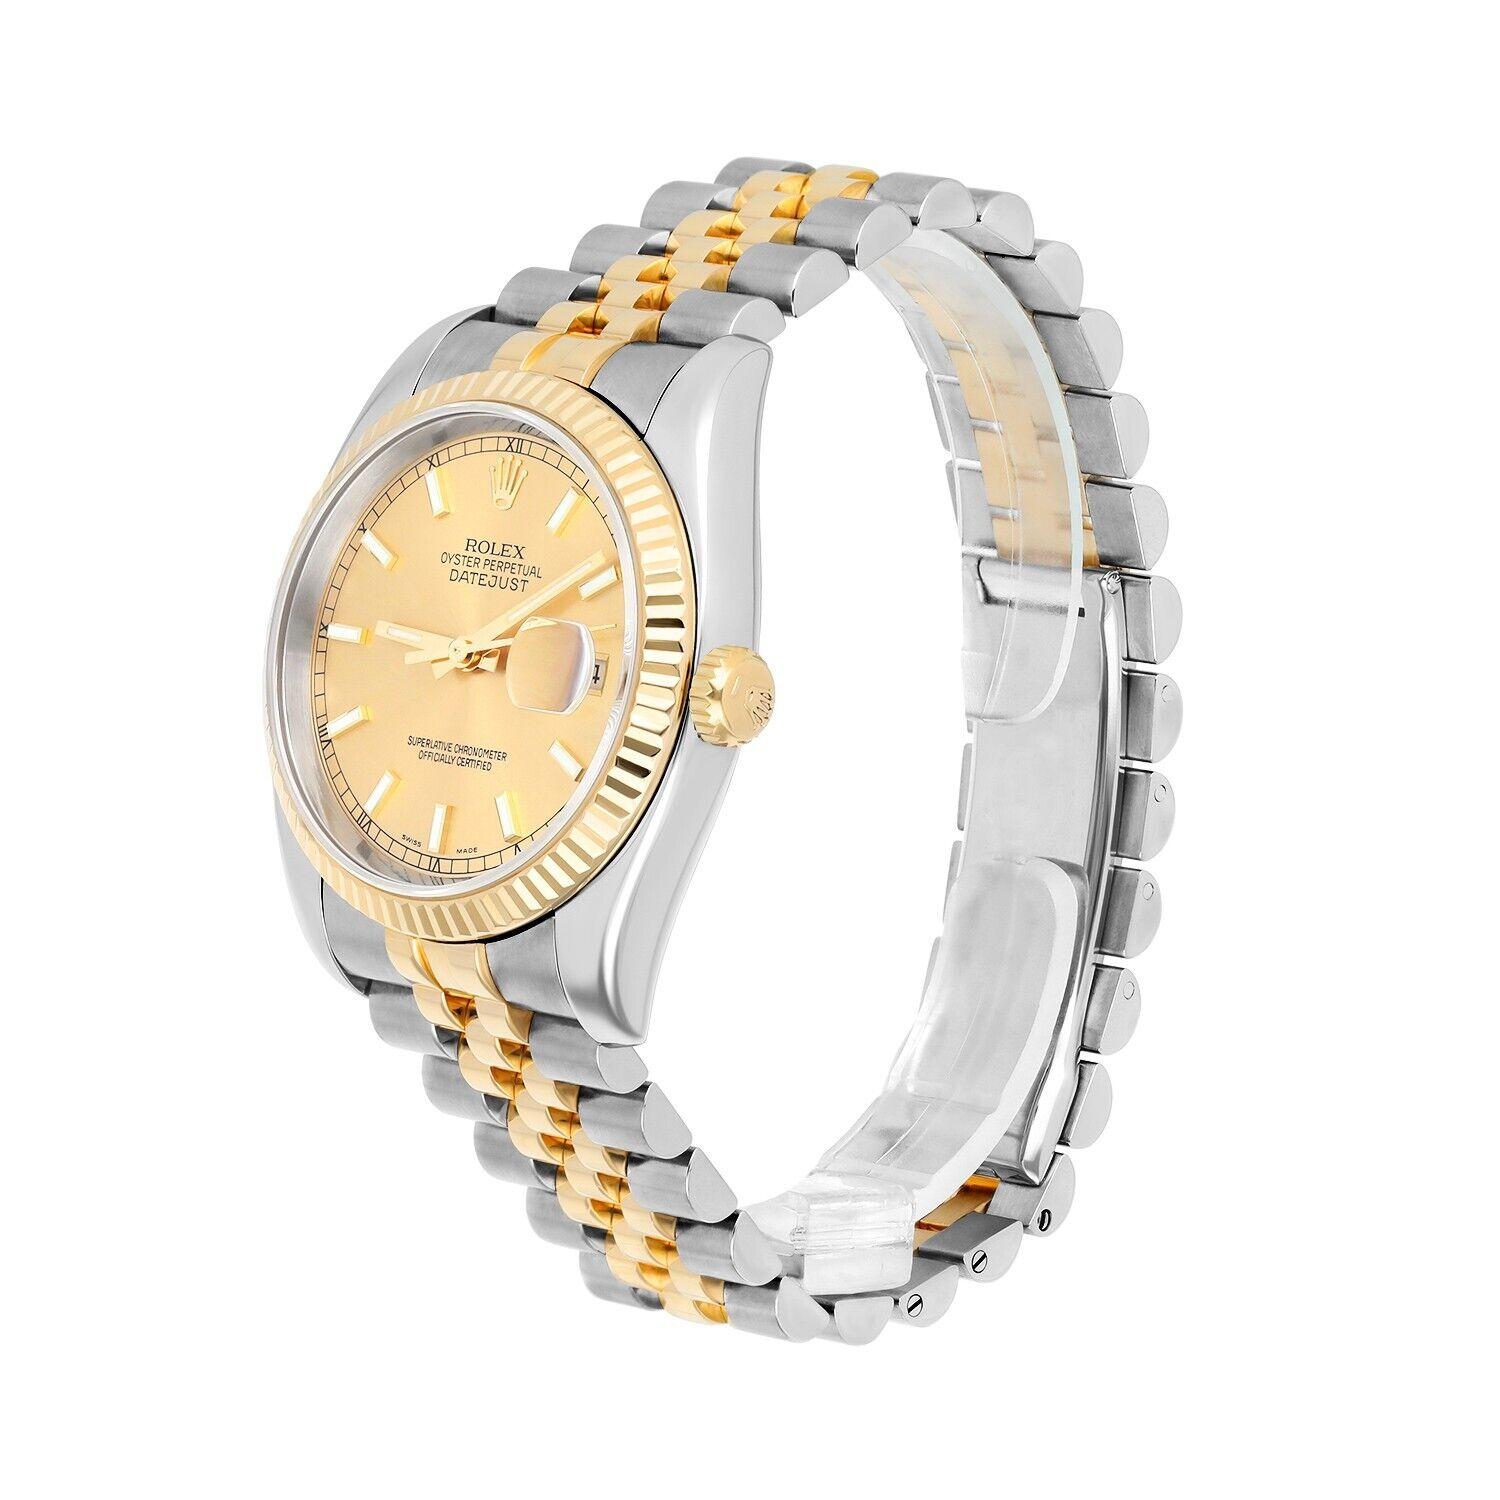 Women's or Men's Rolex Datejust 36 Gold & Steel 116233 Watch Champagne Index Dial Jubilee Watch For Sale